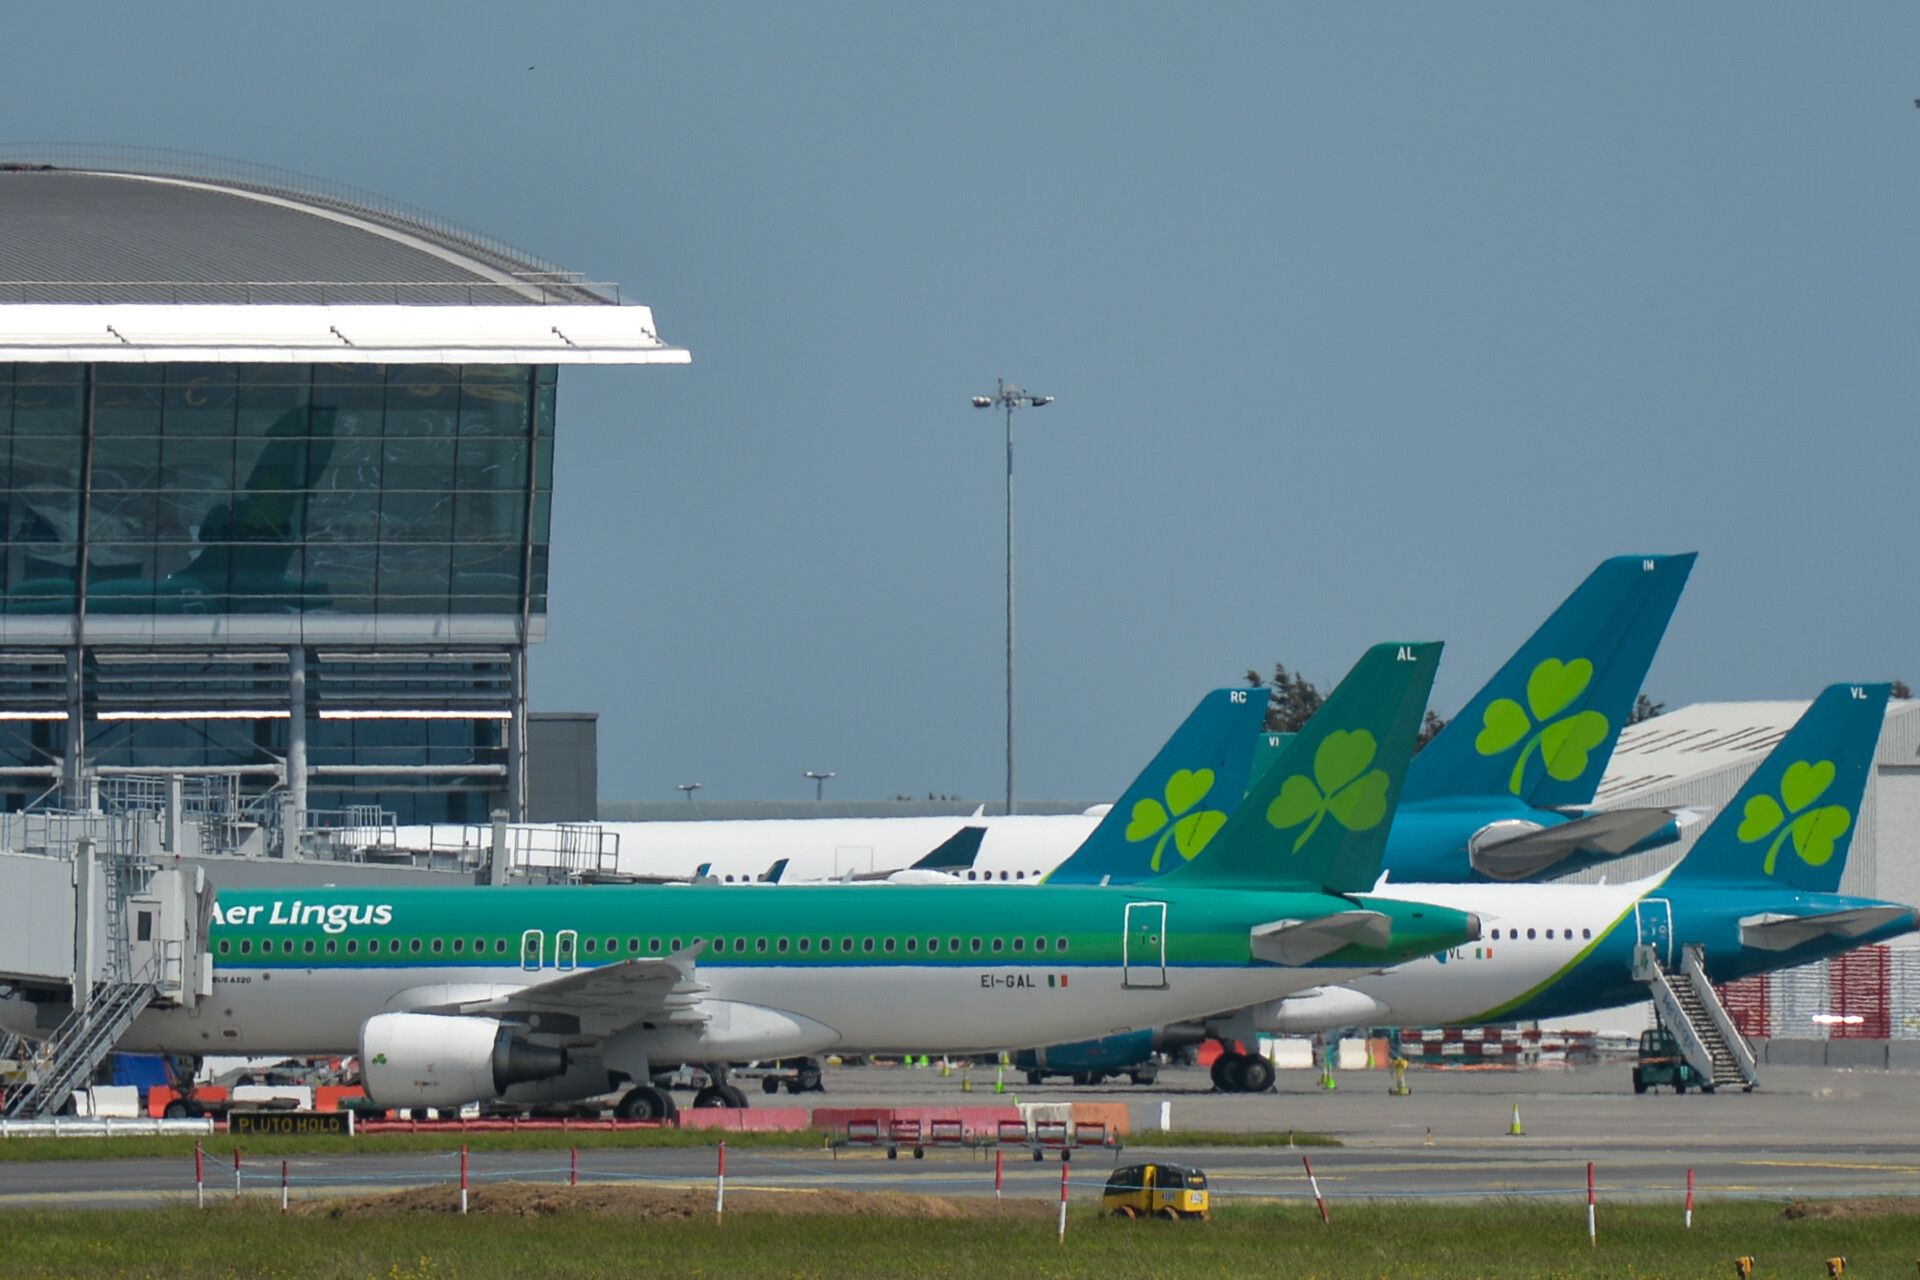 Dublin Airport During COVID-19 Pandemic